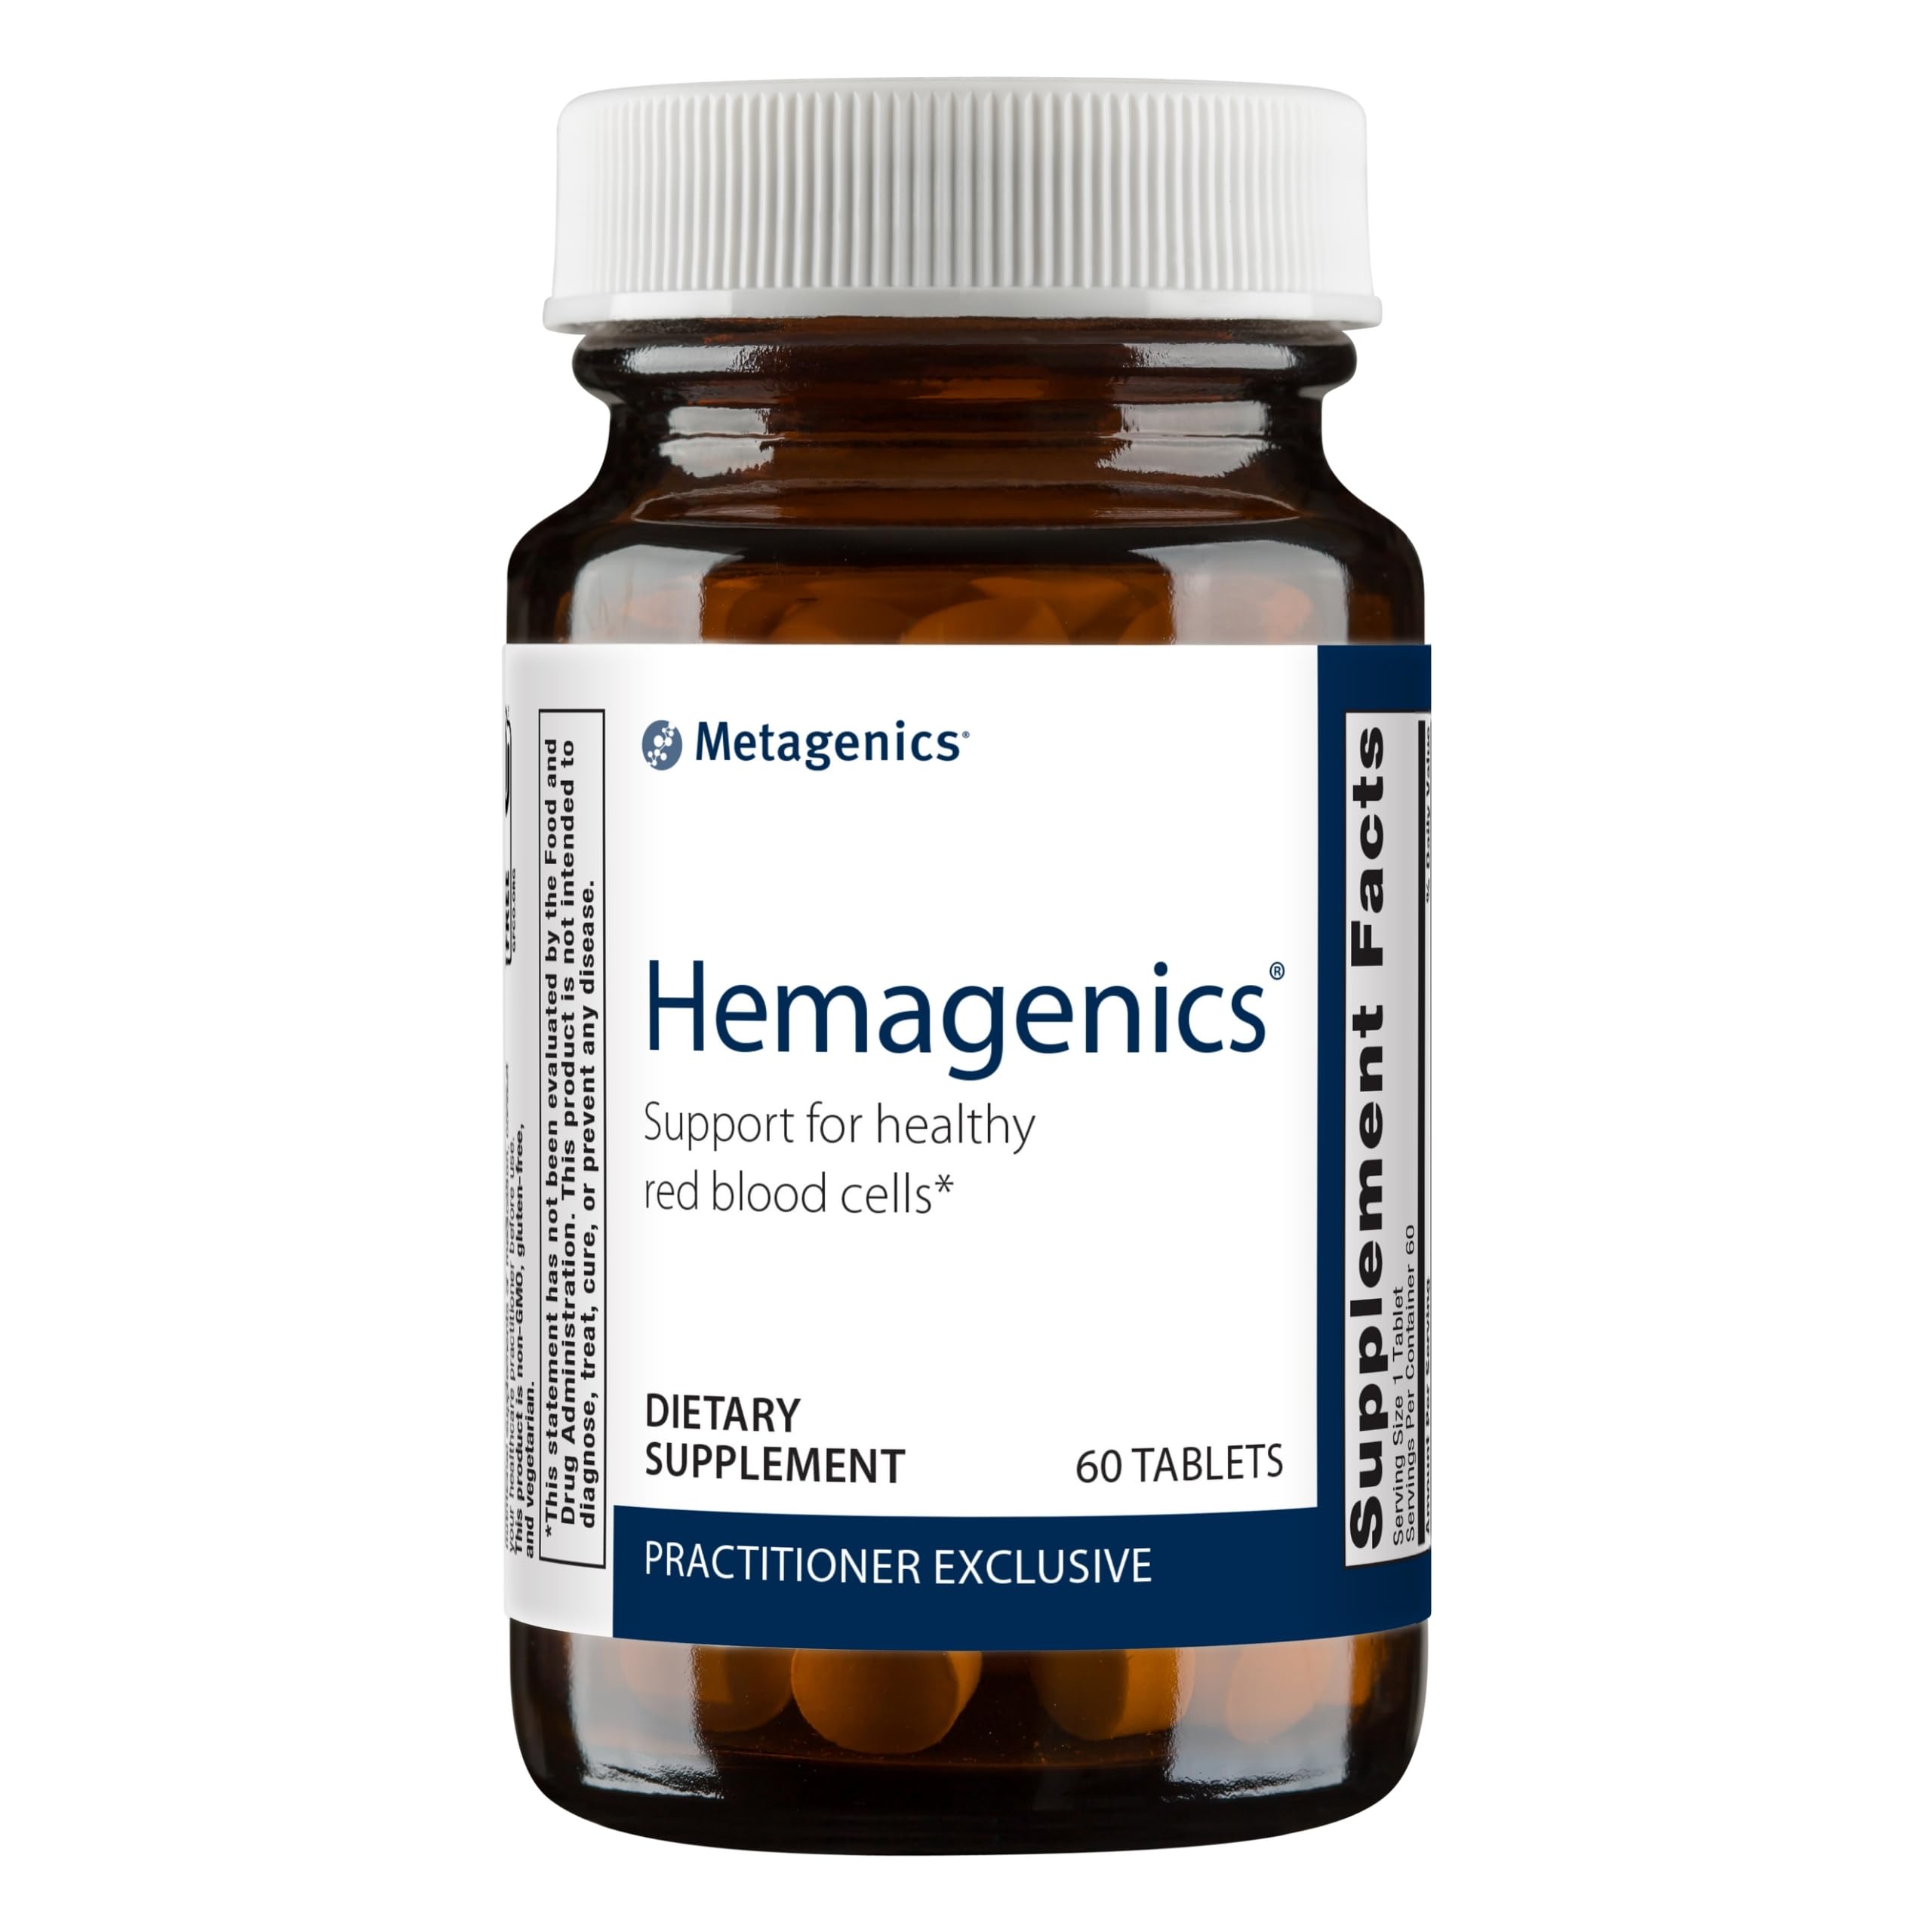 Metagenics Hemagenics Iron Support for Healthy Blood Cells - 60 Tablets